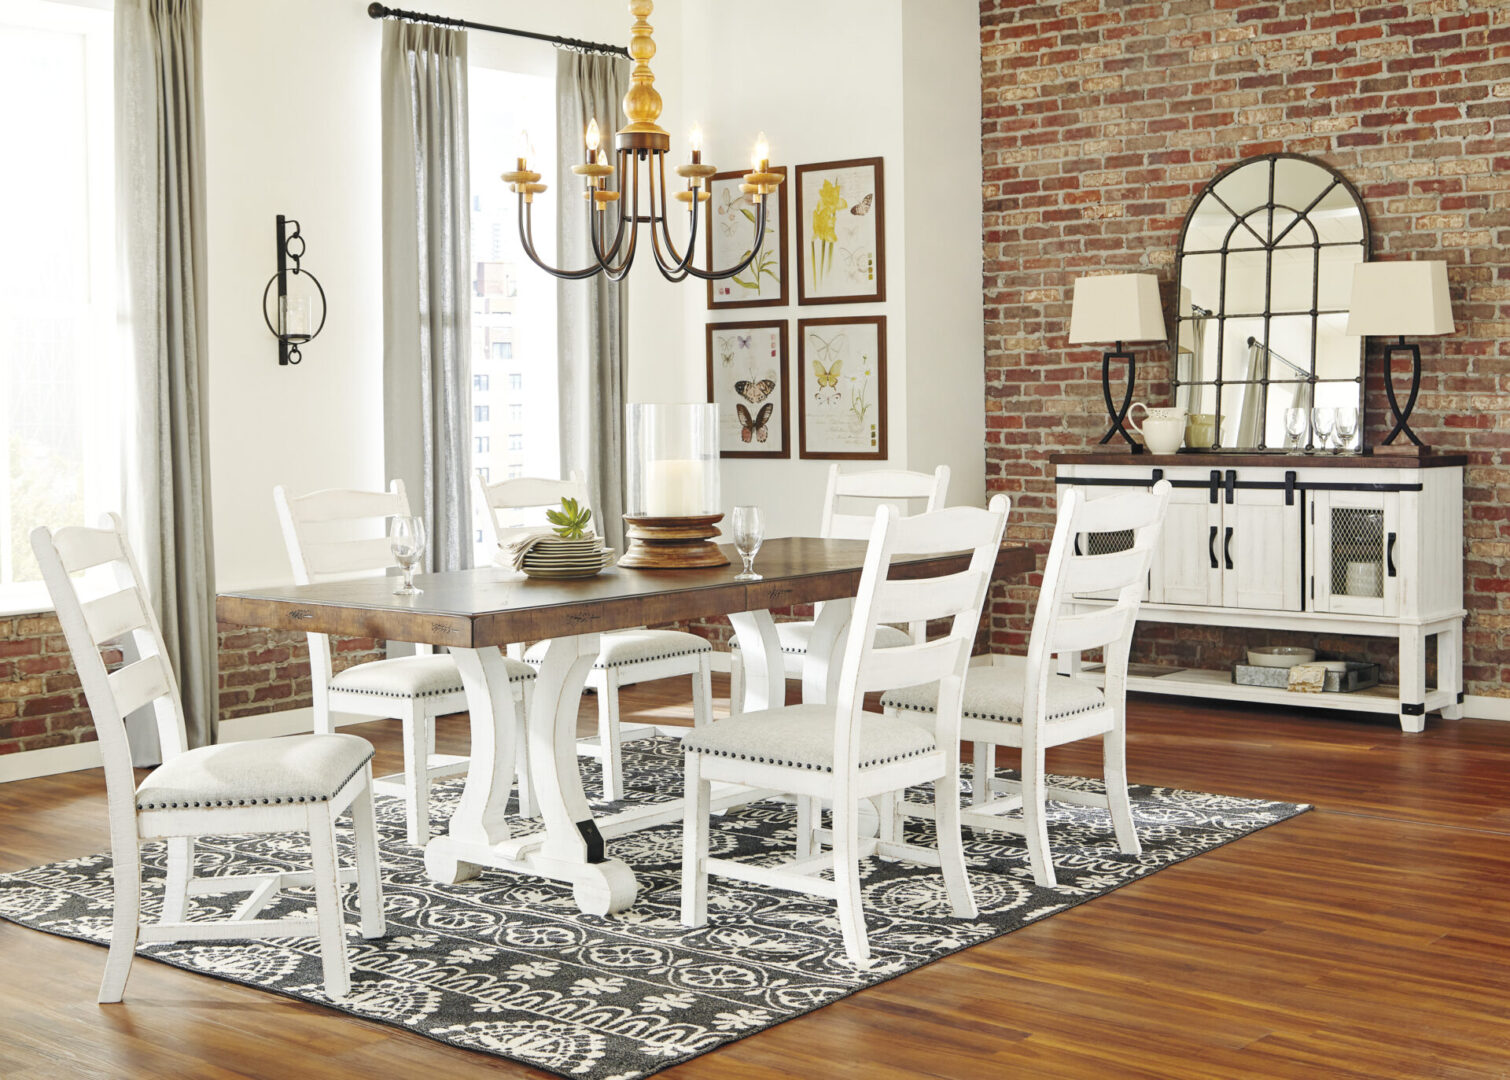 A dining room with white chairs and a table